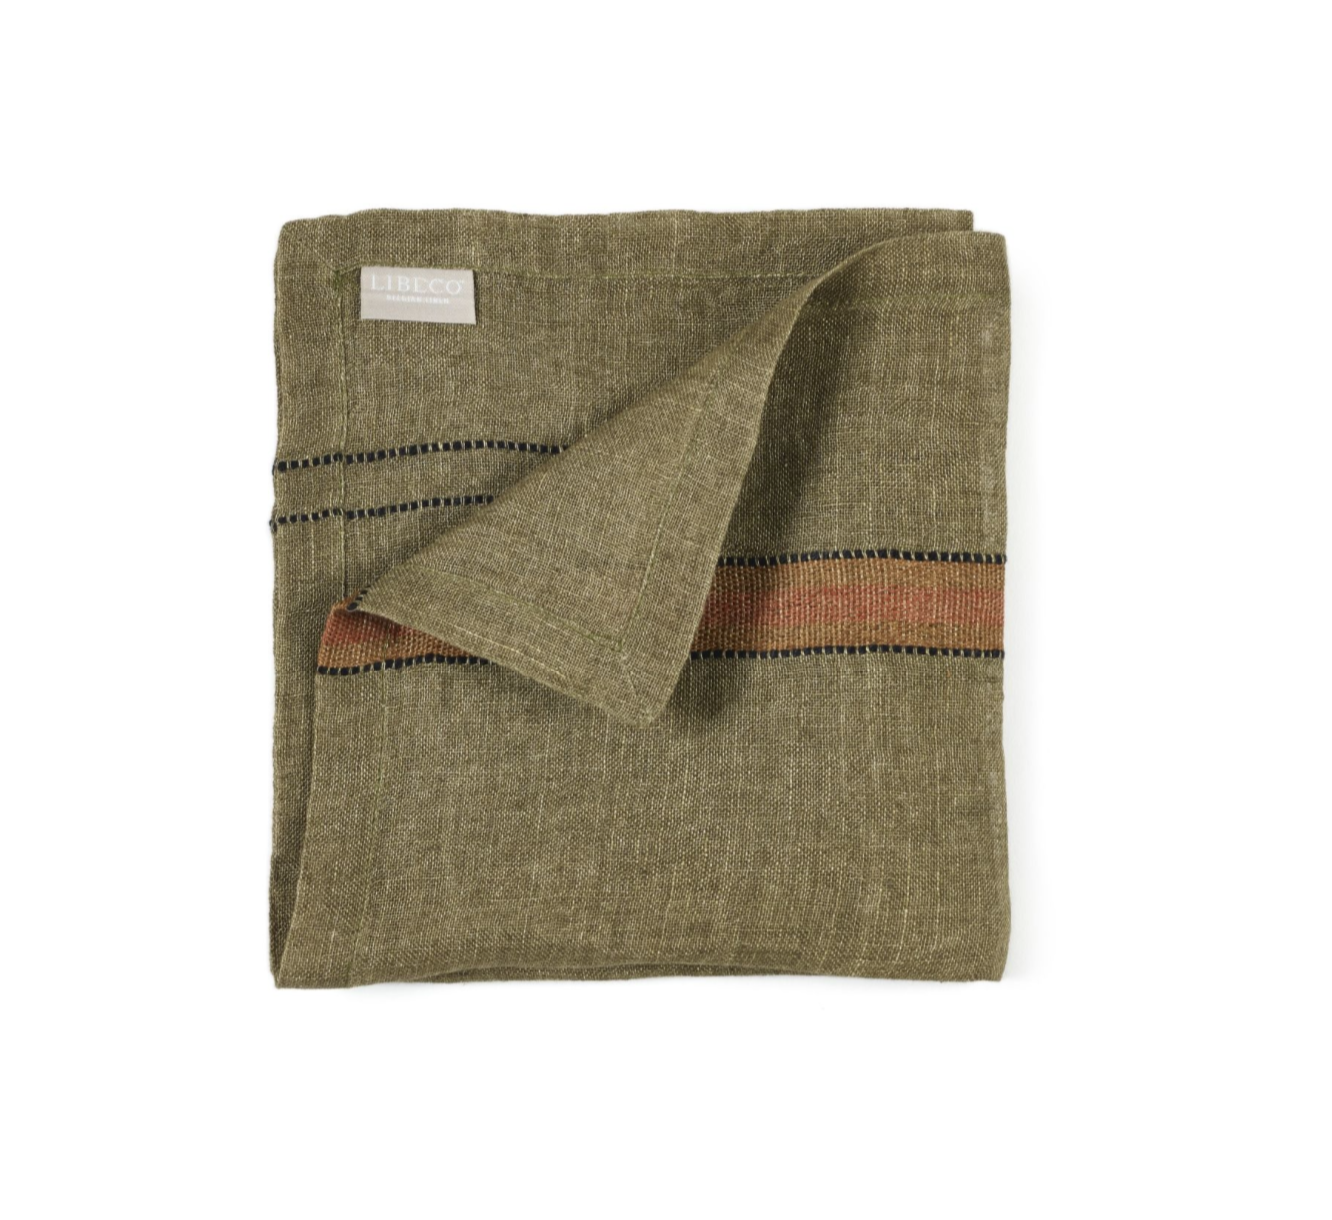 Marie Green linen napkins by Libeco